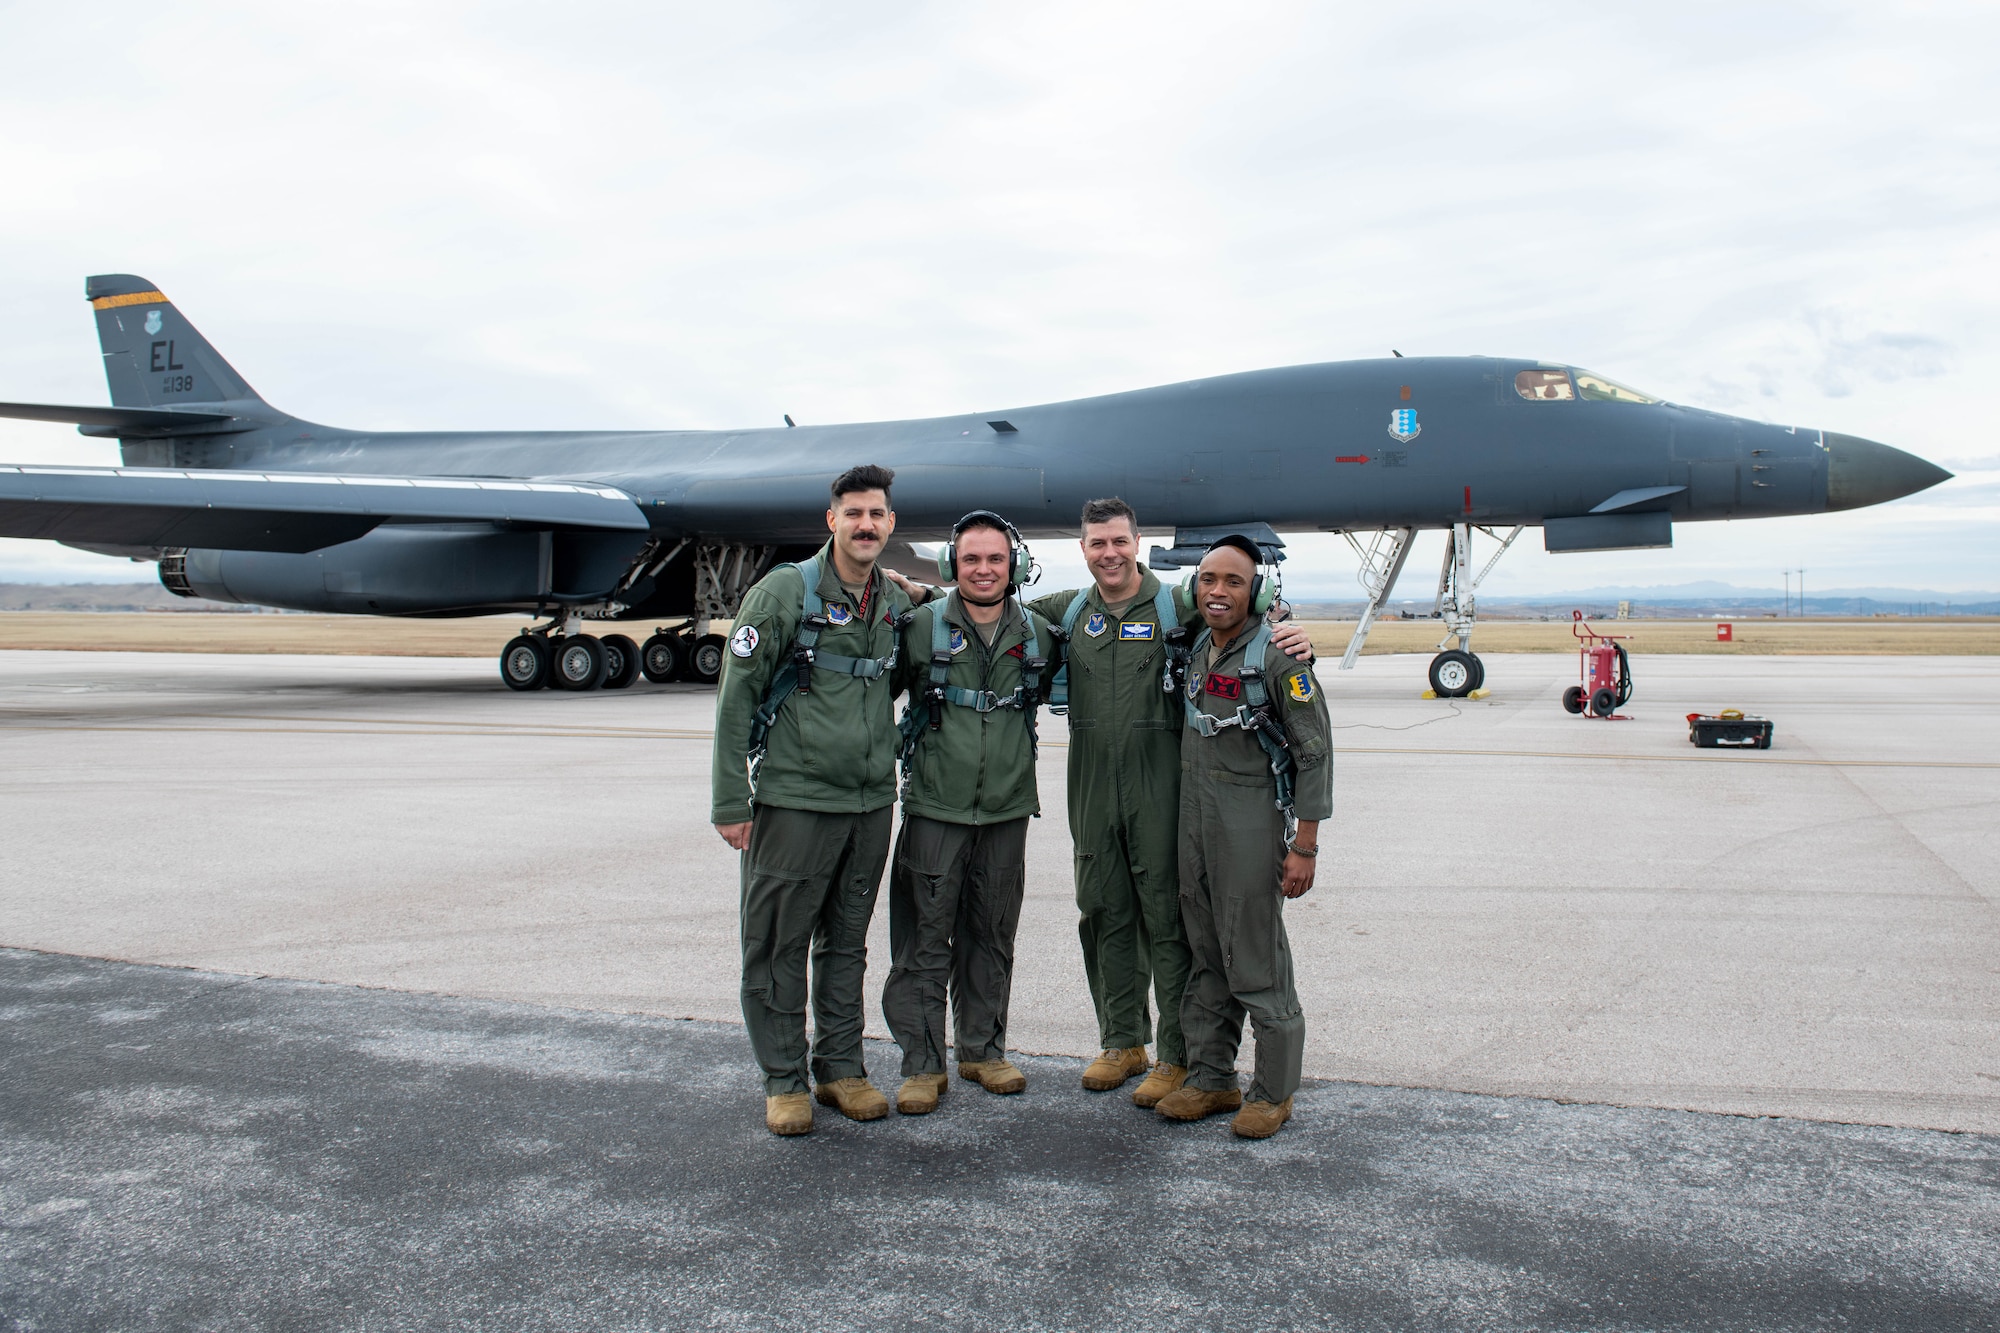 Maj. Gen. Andrew J. Gebara, 8th Air Force and Joint-Global Strike Operations Center commander, poses with 34th Bomb Squadron aviators for a group photo at Ellsworth Air Force Base, S.D., Oct. 26, 2021. Gebara heads the J-GSOC, which serves as the central command and control node for all operations within Air Force Global Strike Command. (U.S. Air Force photo by Airman 1st Class Quentin Marx)